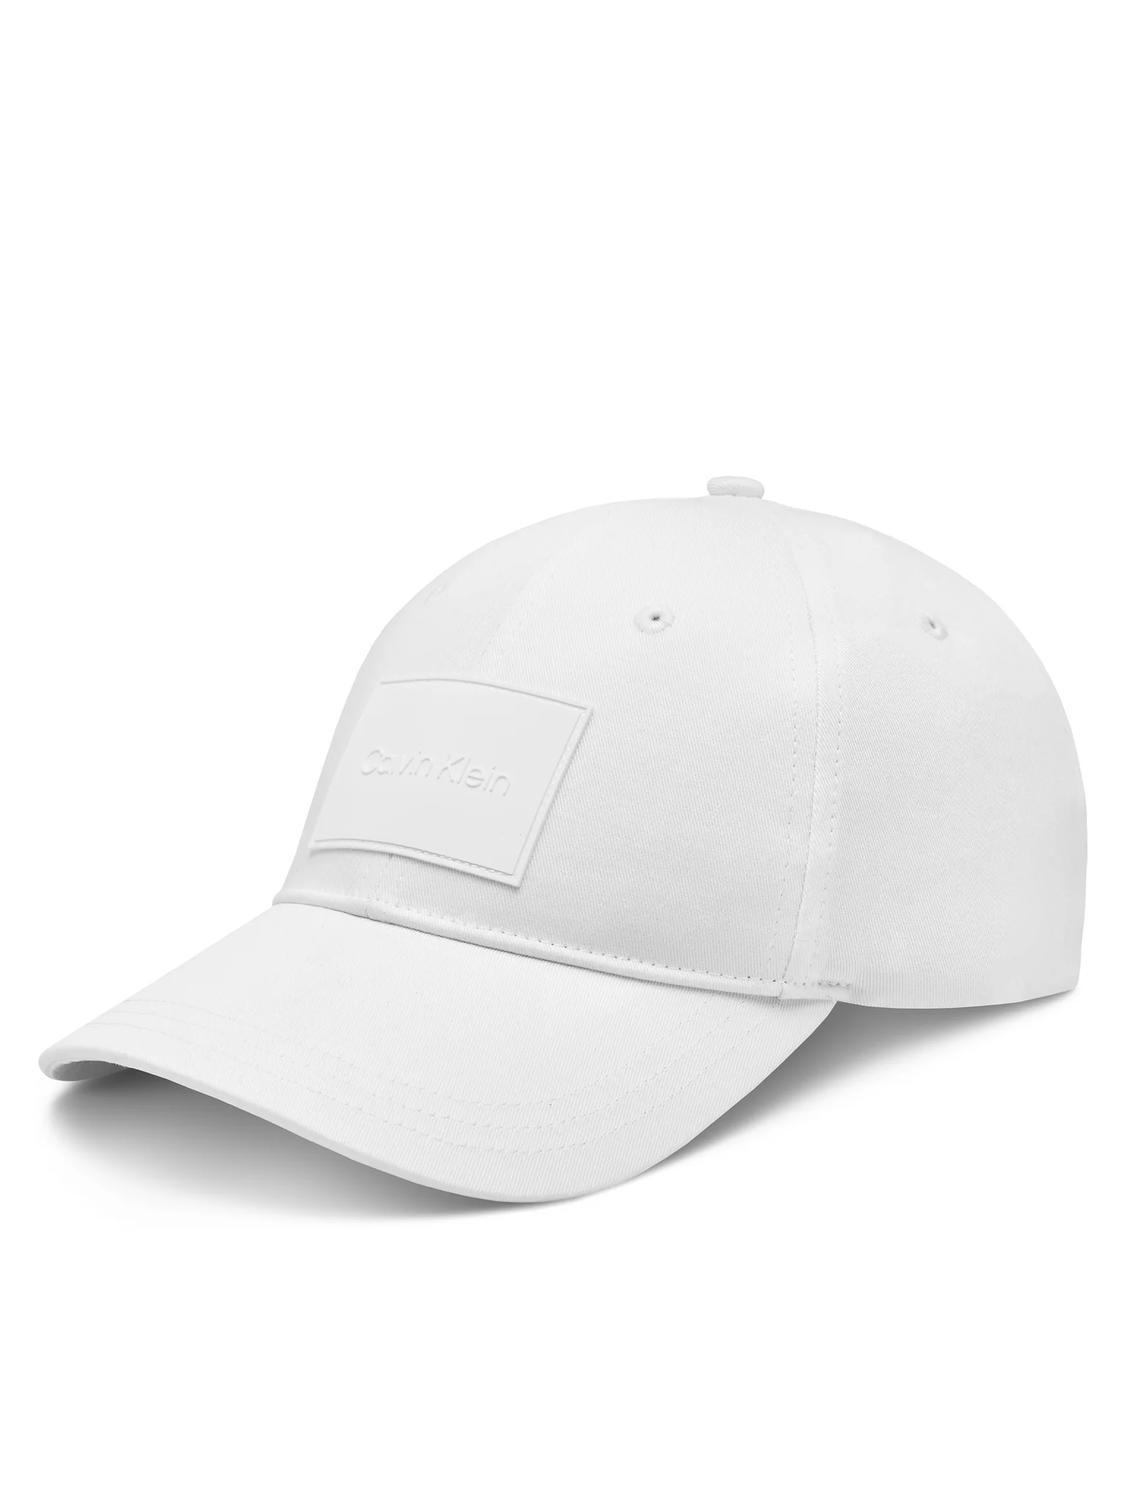 Calvin Klein Tonal Rubber Patch Baseball Hat Ck White - Buy At Outlet  Prices!